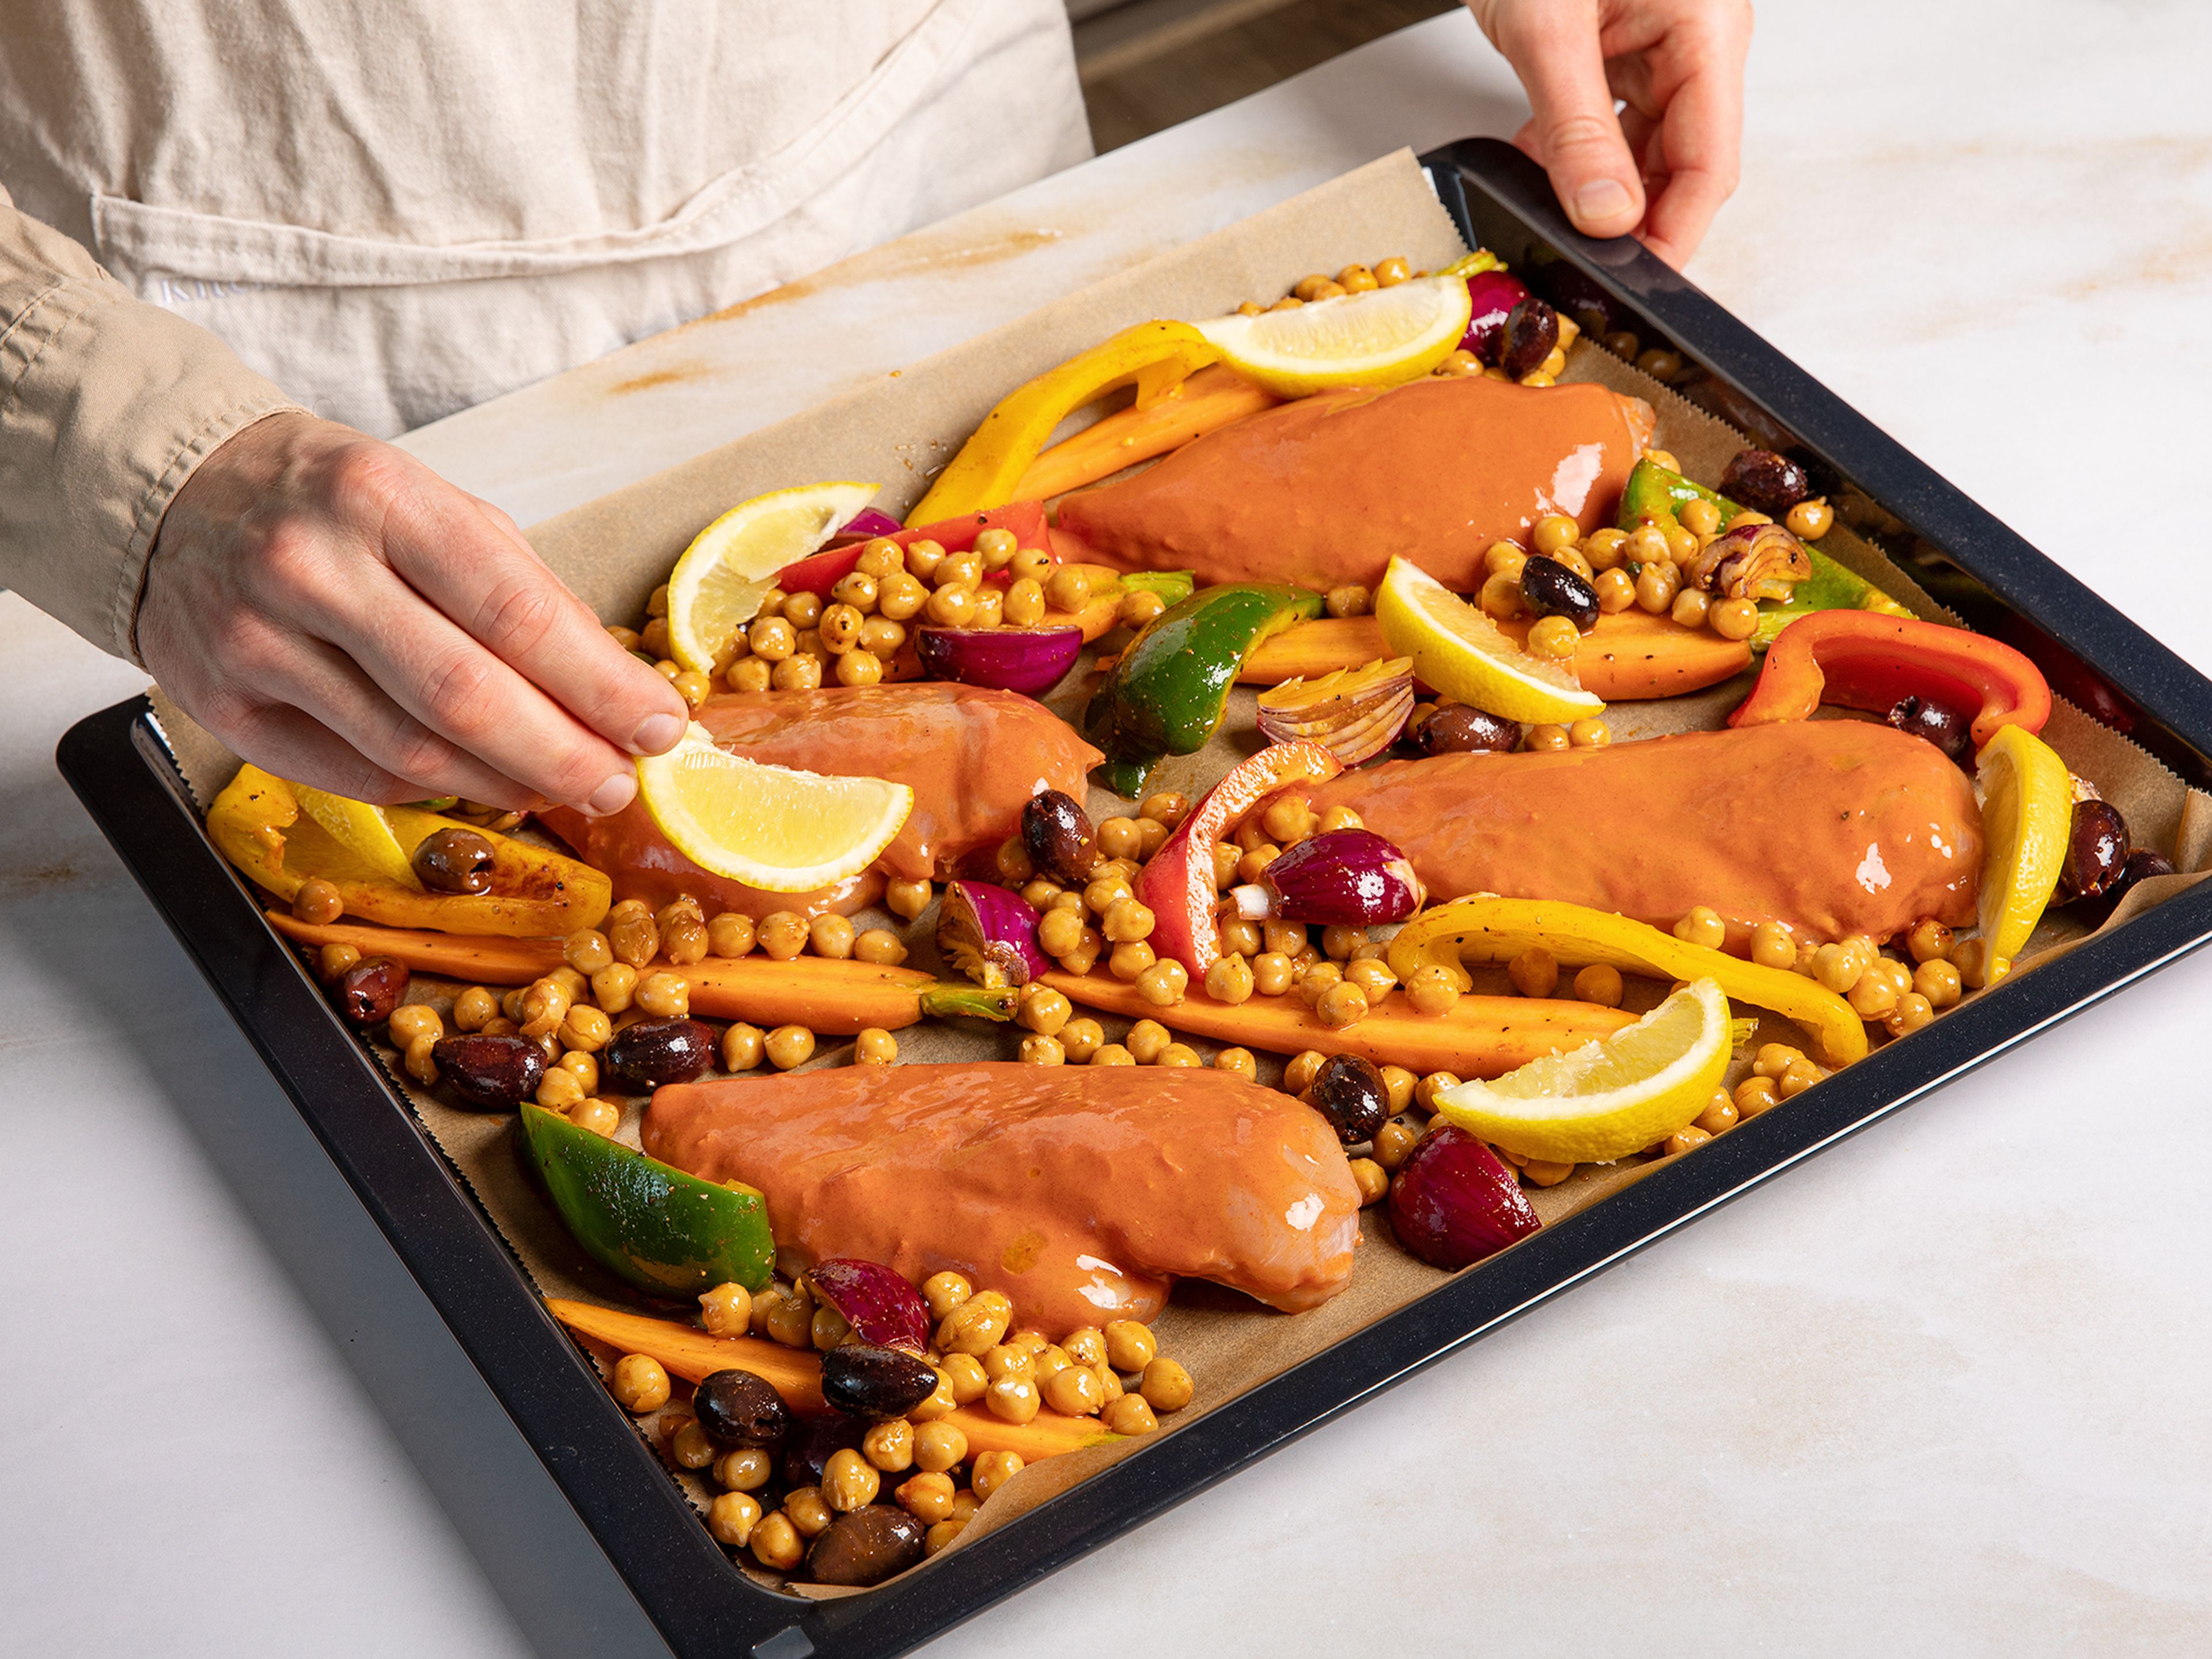 Put the vegetables and chickpeas on a baking sheet lined with baking paper and mix with olive oil, paprika, salt, and pepper. Place the chicken breasts in between, and bake for approx. 30-35 min.